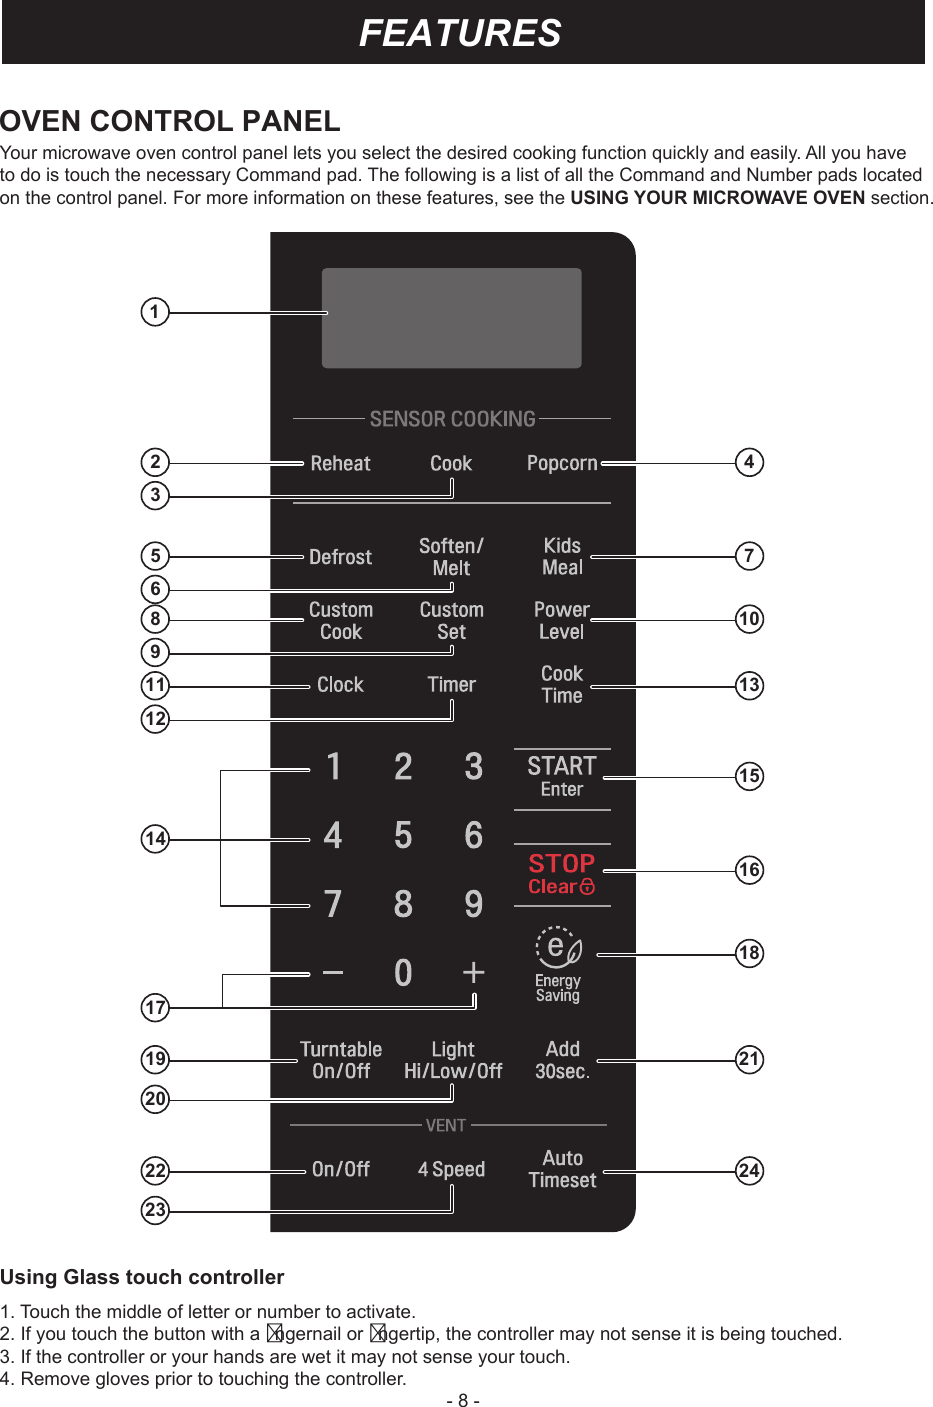 - 8 -12 435 768 1091114131516182112192024222317OVEN CONTROL PANELFEATURESUsing Glass touch controller1. Touch the middle of letter or number to activate.2. If you touch the button with a  ngernail or  ngertip, the controller may not sense it is being touched.3. If the controller or your hands are wet it may not sense your touch.4. Remove gloves prior to touching the controller.Your microwave oven control panel lets you select the desired cooking function quickly and easily. All you haveto do is touch the necessary Command pad. The following is a list of all the Command and Number pads located on the control panel. For more information on these features, see the USING YOUR MICROWAVE OVEN section.